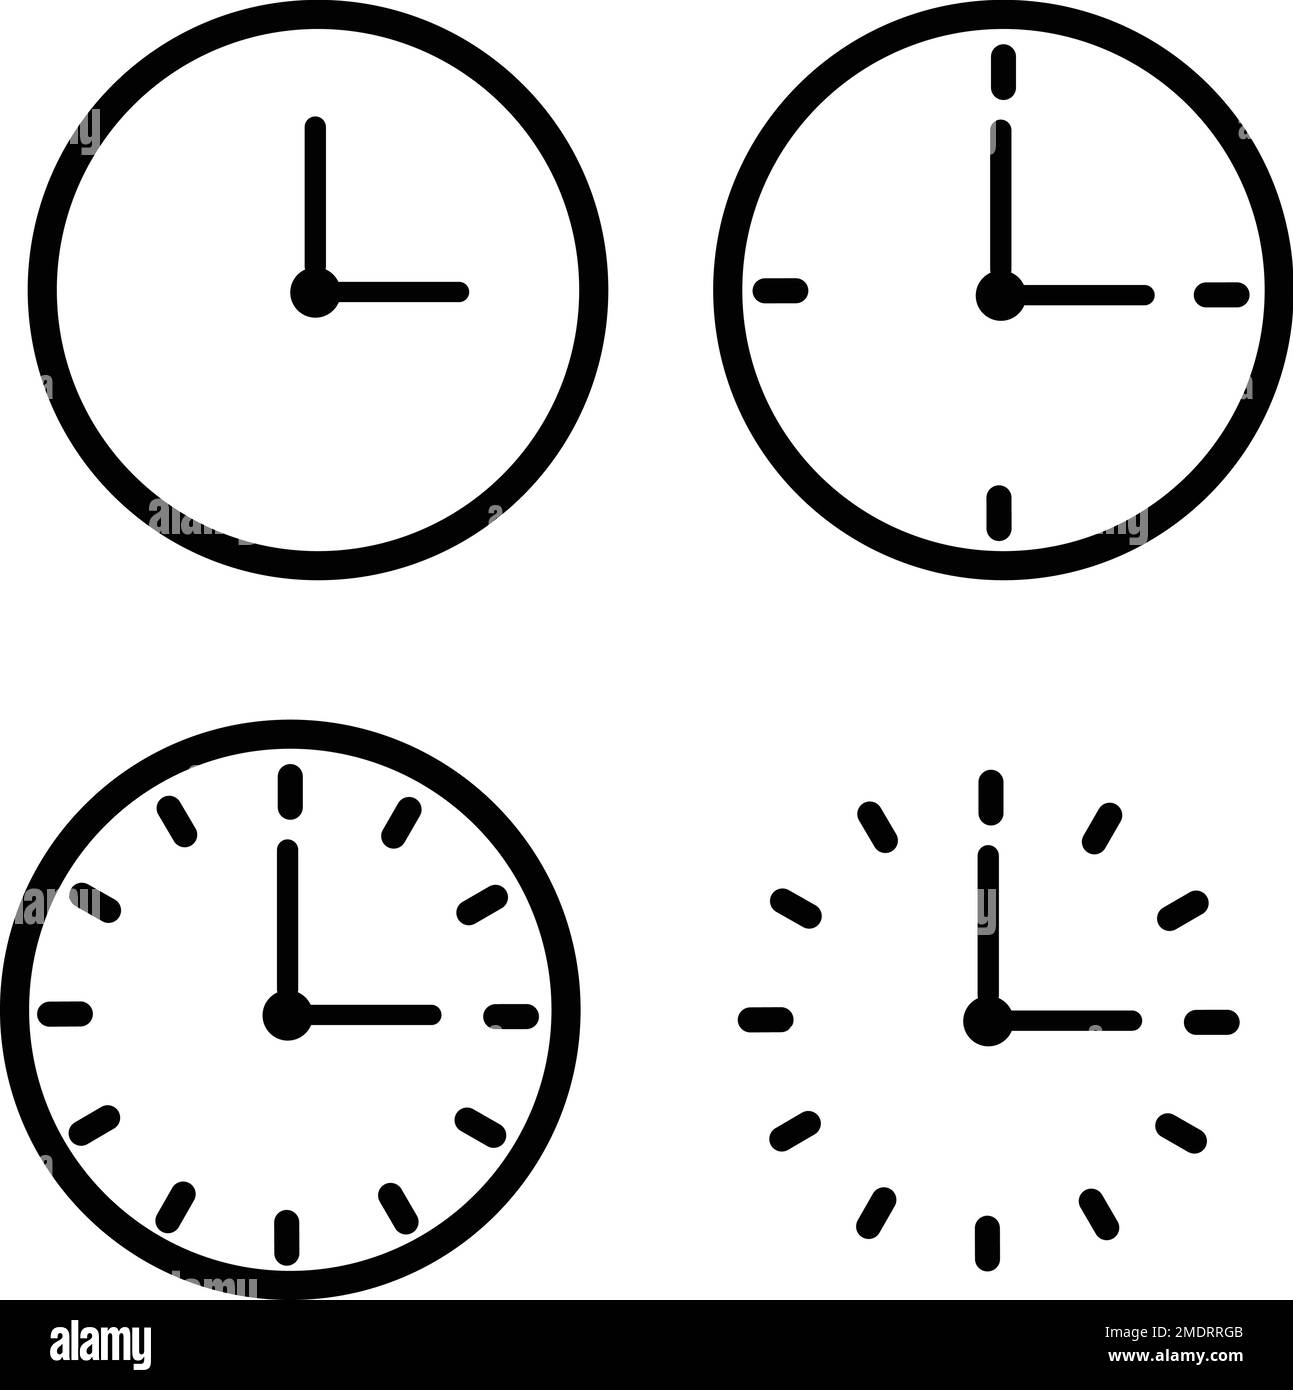 Time and Clock icons set. Clocks icon collection design. Horizontal set of analog clock icon symbol . Vector illustration Stock Vector